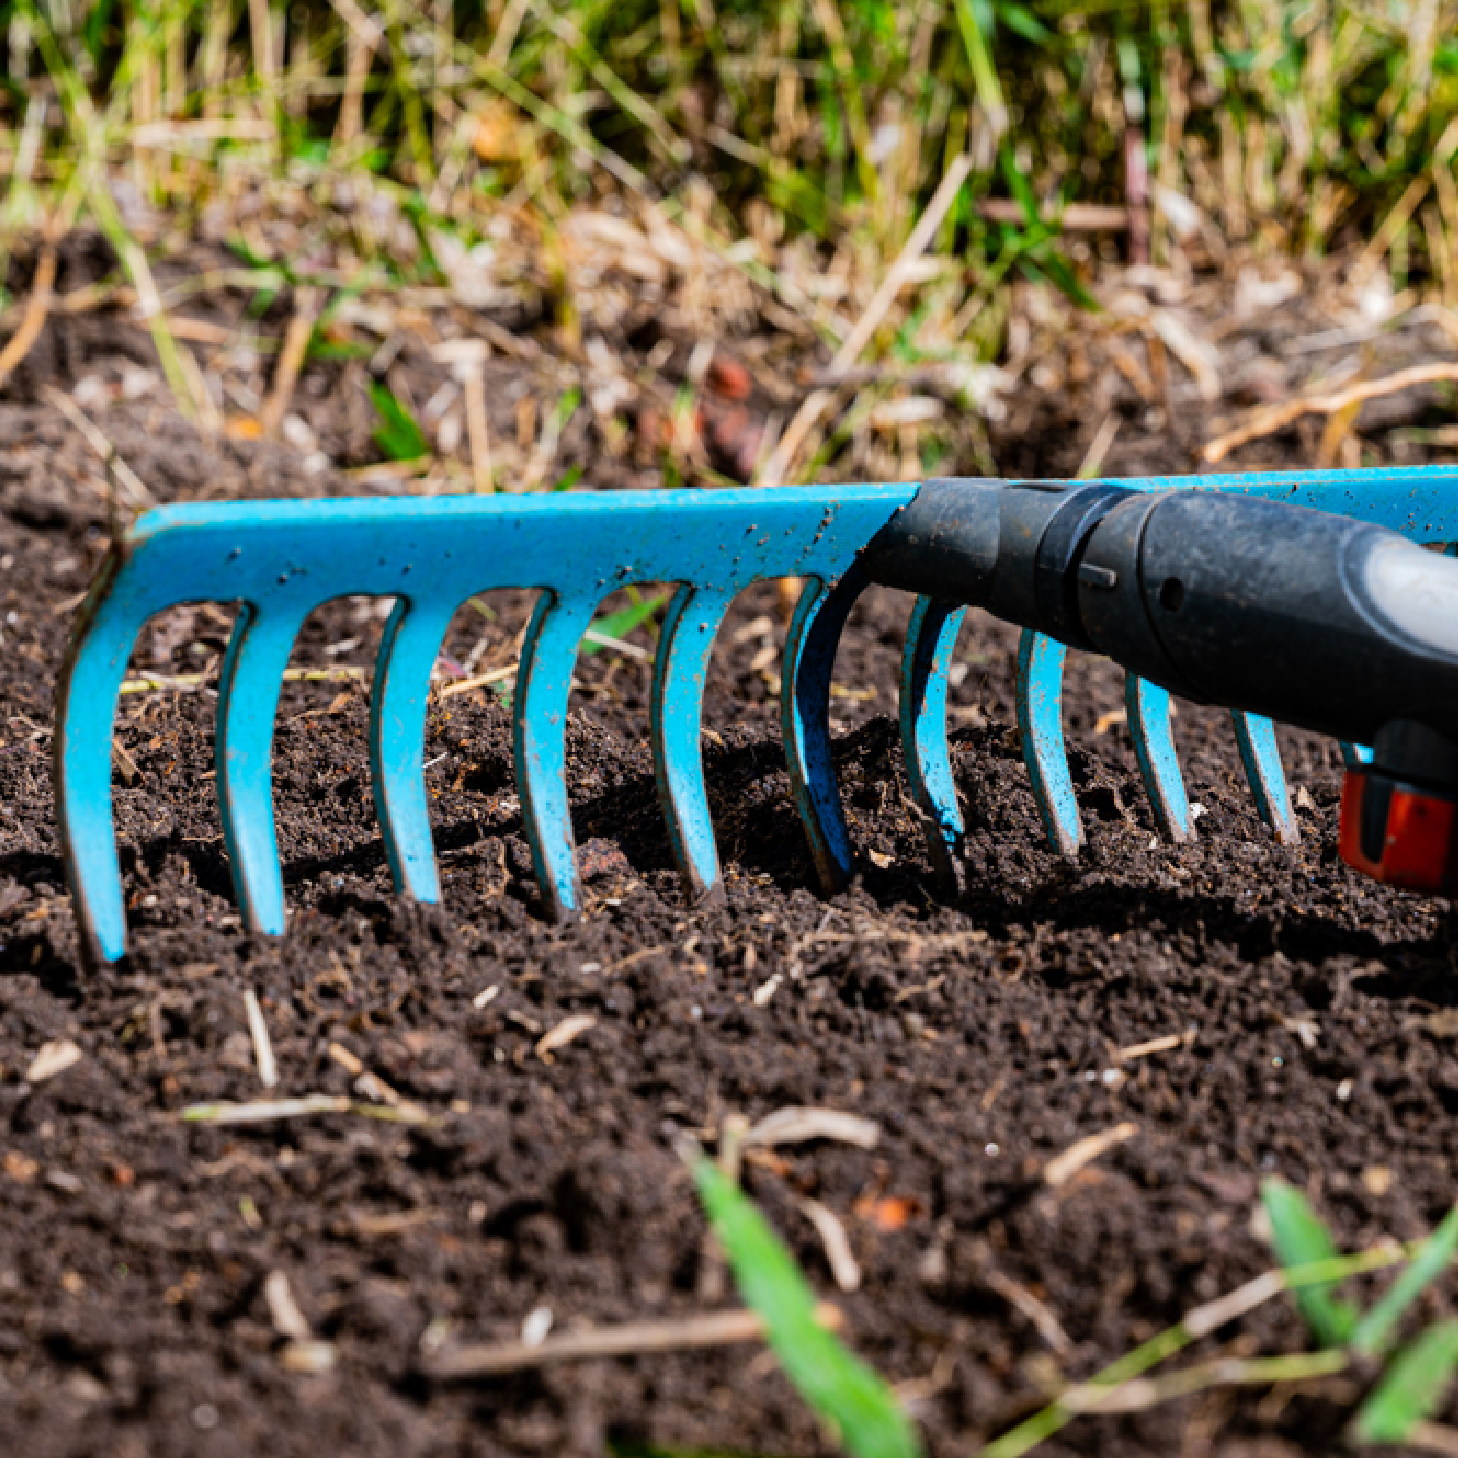 Winterizing your Vegetable Bed